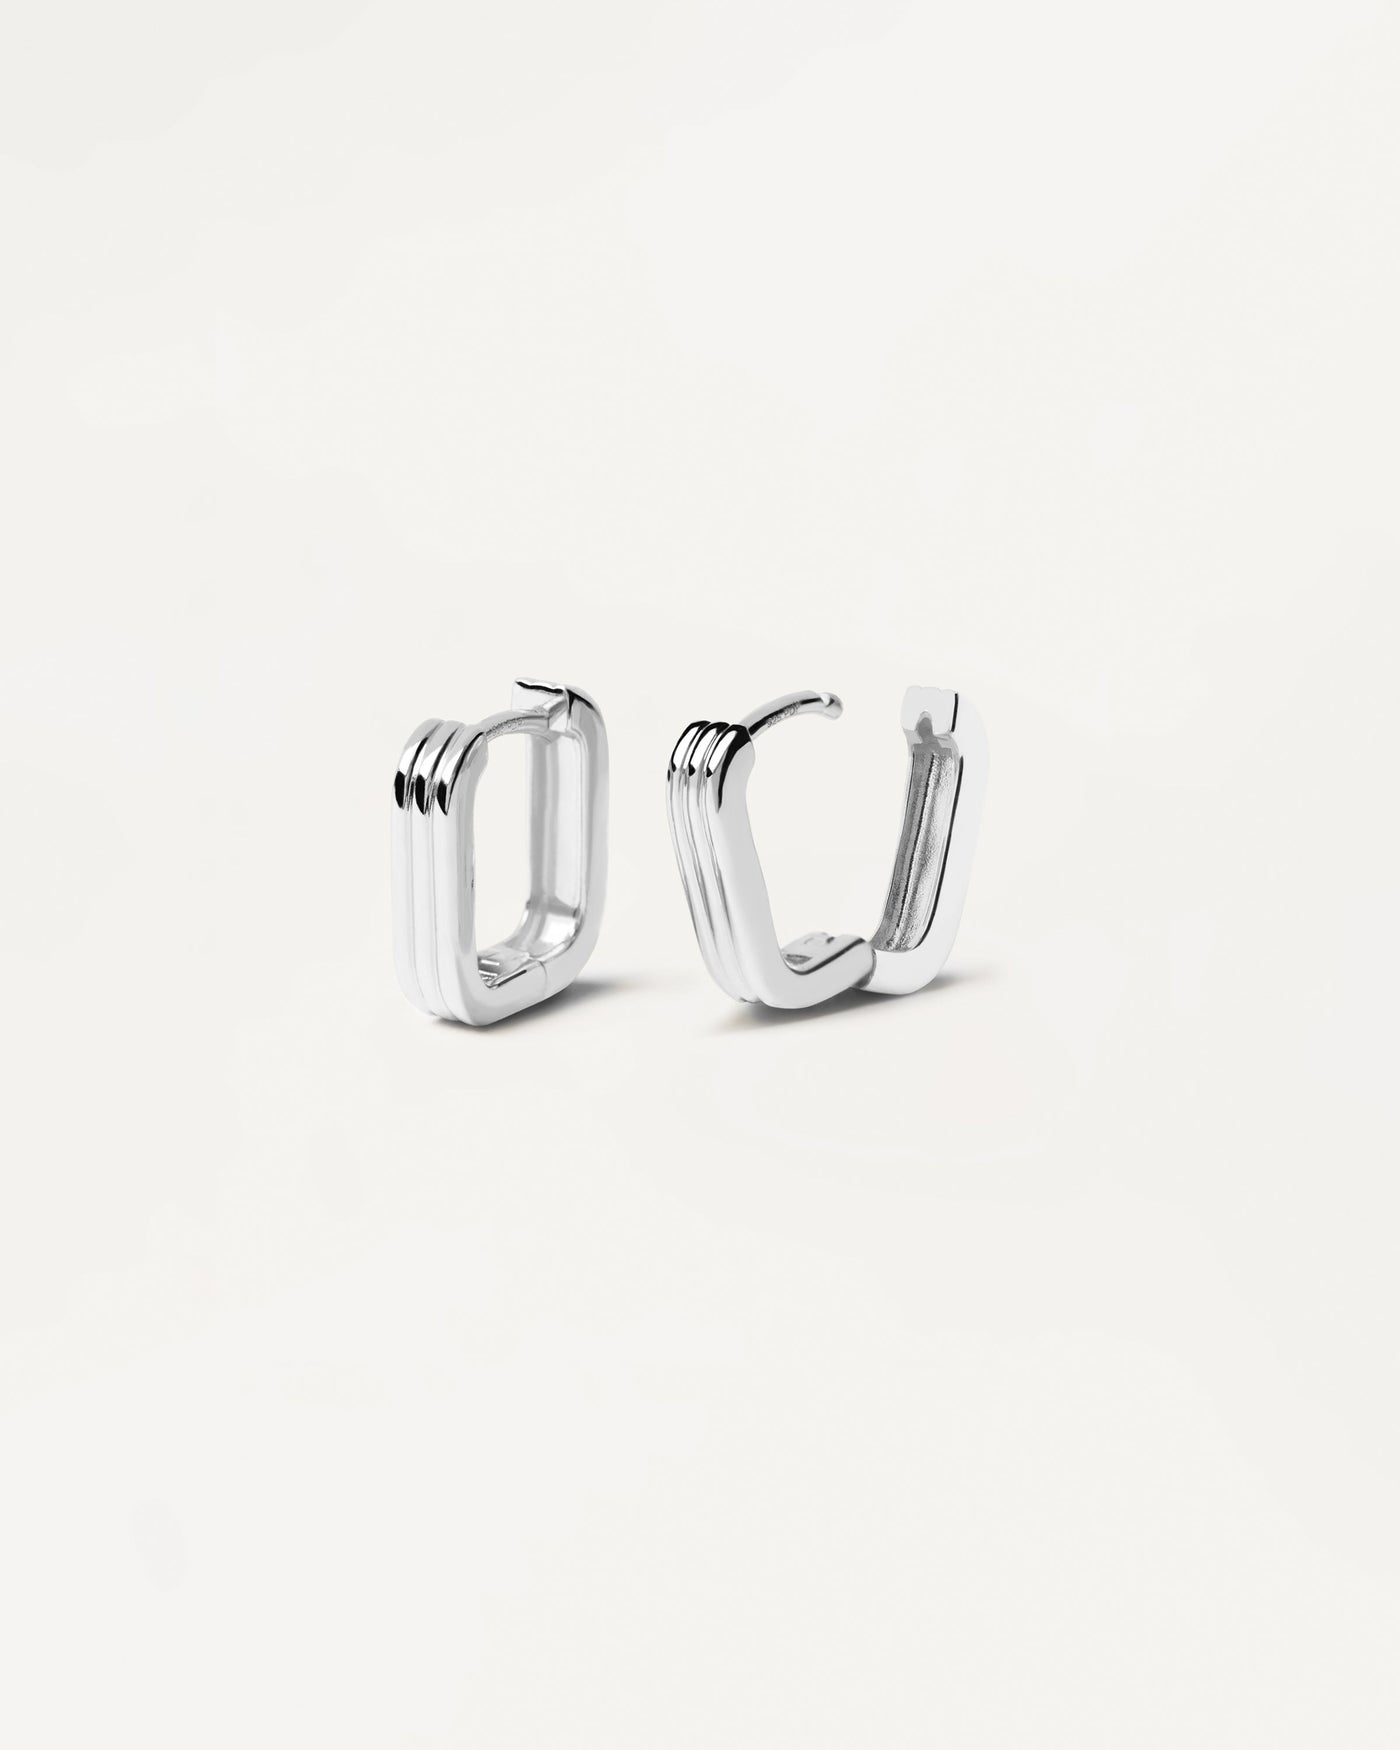 2023 Selection | Nova Silver Earrings. Dainty squarred hoops in sterling silver with 3 bands design. Get the latest arrival from PDPAOLA. Place your order safely and get this Best Seller. Free Shipping.